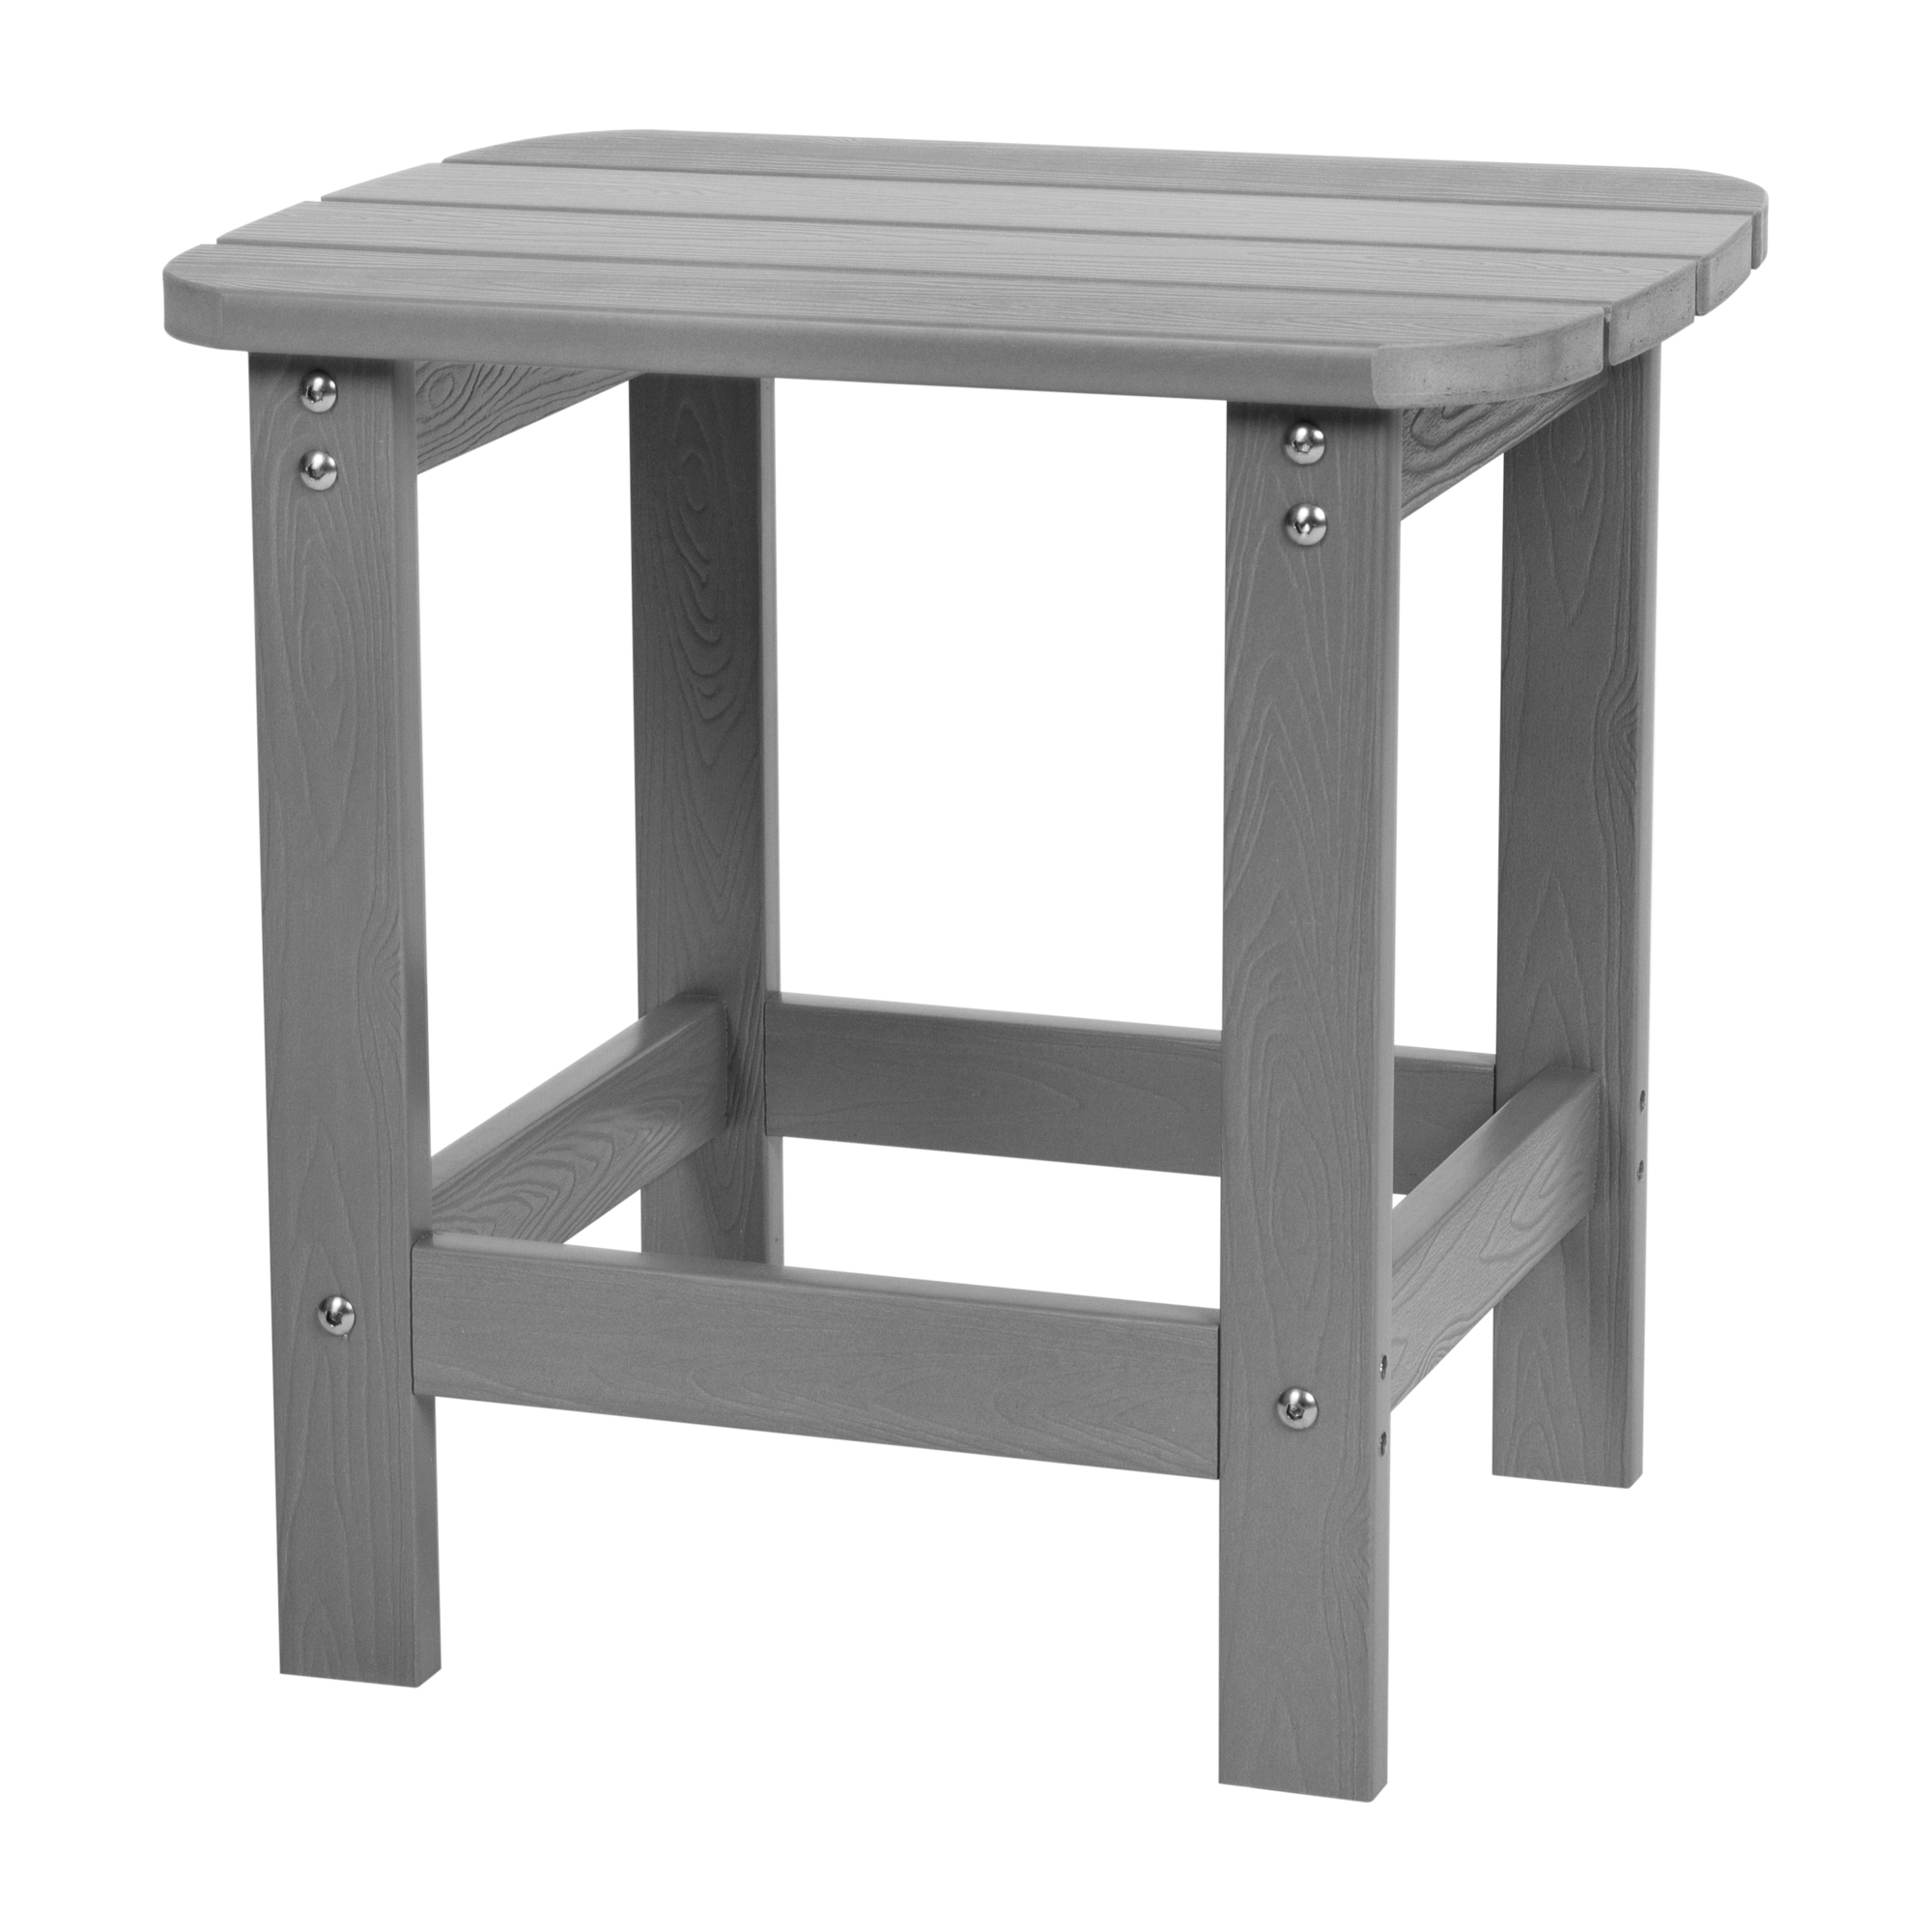 Flash Furniture, Gray All-Weather Adirondack Side Table, Table Shape Rectangle, Primary Color Gray, Height 18.25 in, Model JJT14001GY